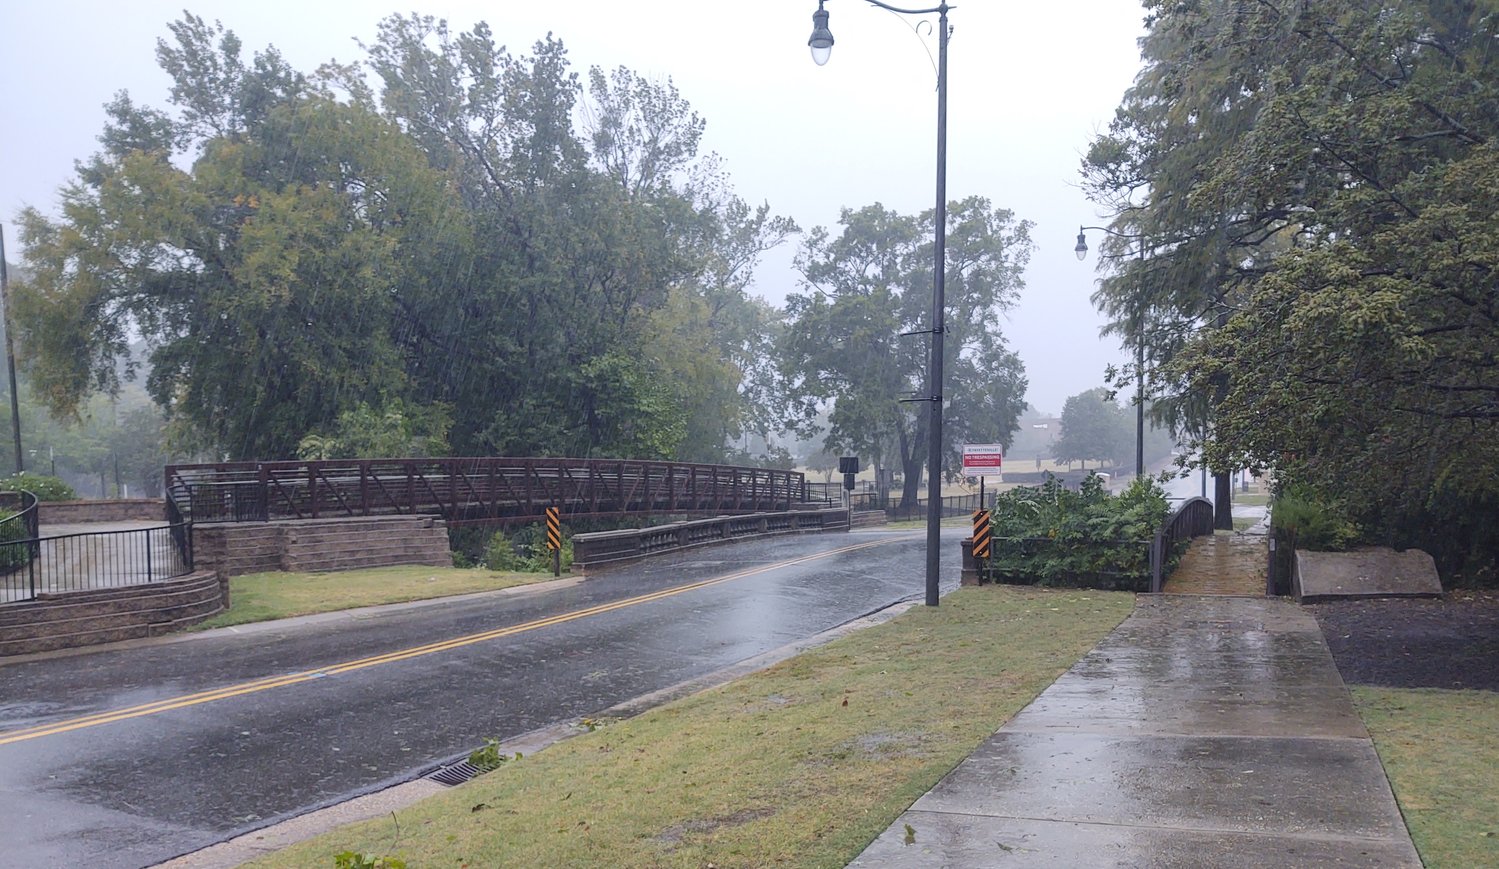 Strong wind and rain batter the Ray Avenue bridge over Cross Creek in downtown Fayetteville just before 5 p.m. Friday as the remnants of Hurricane Ian passed through the region.